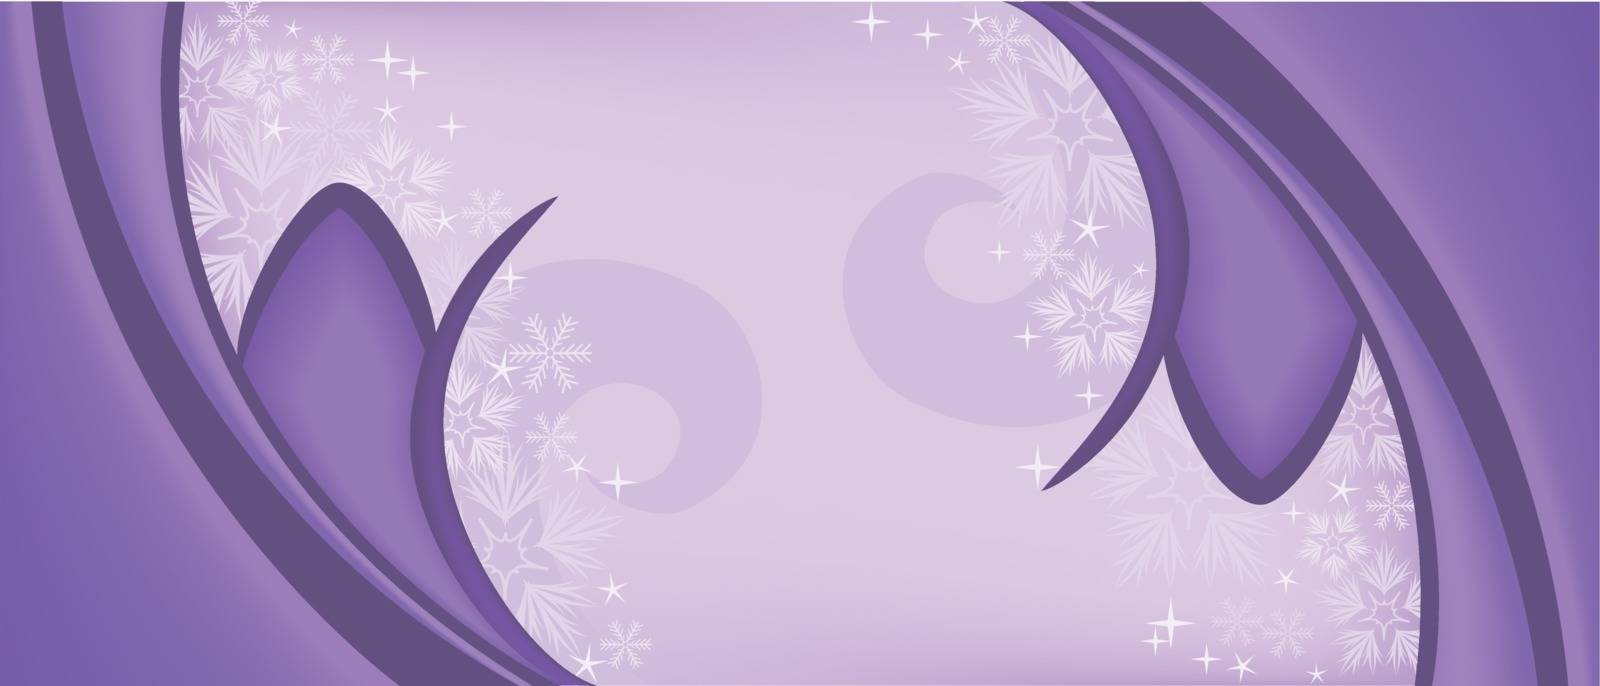 Christmas symmetric purple background with snowflakes and curls